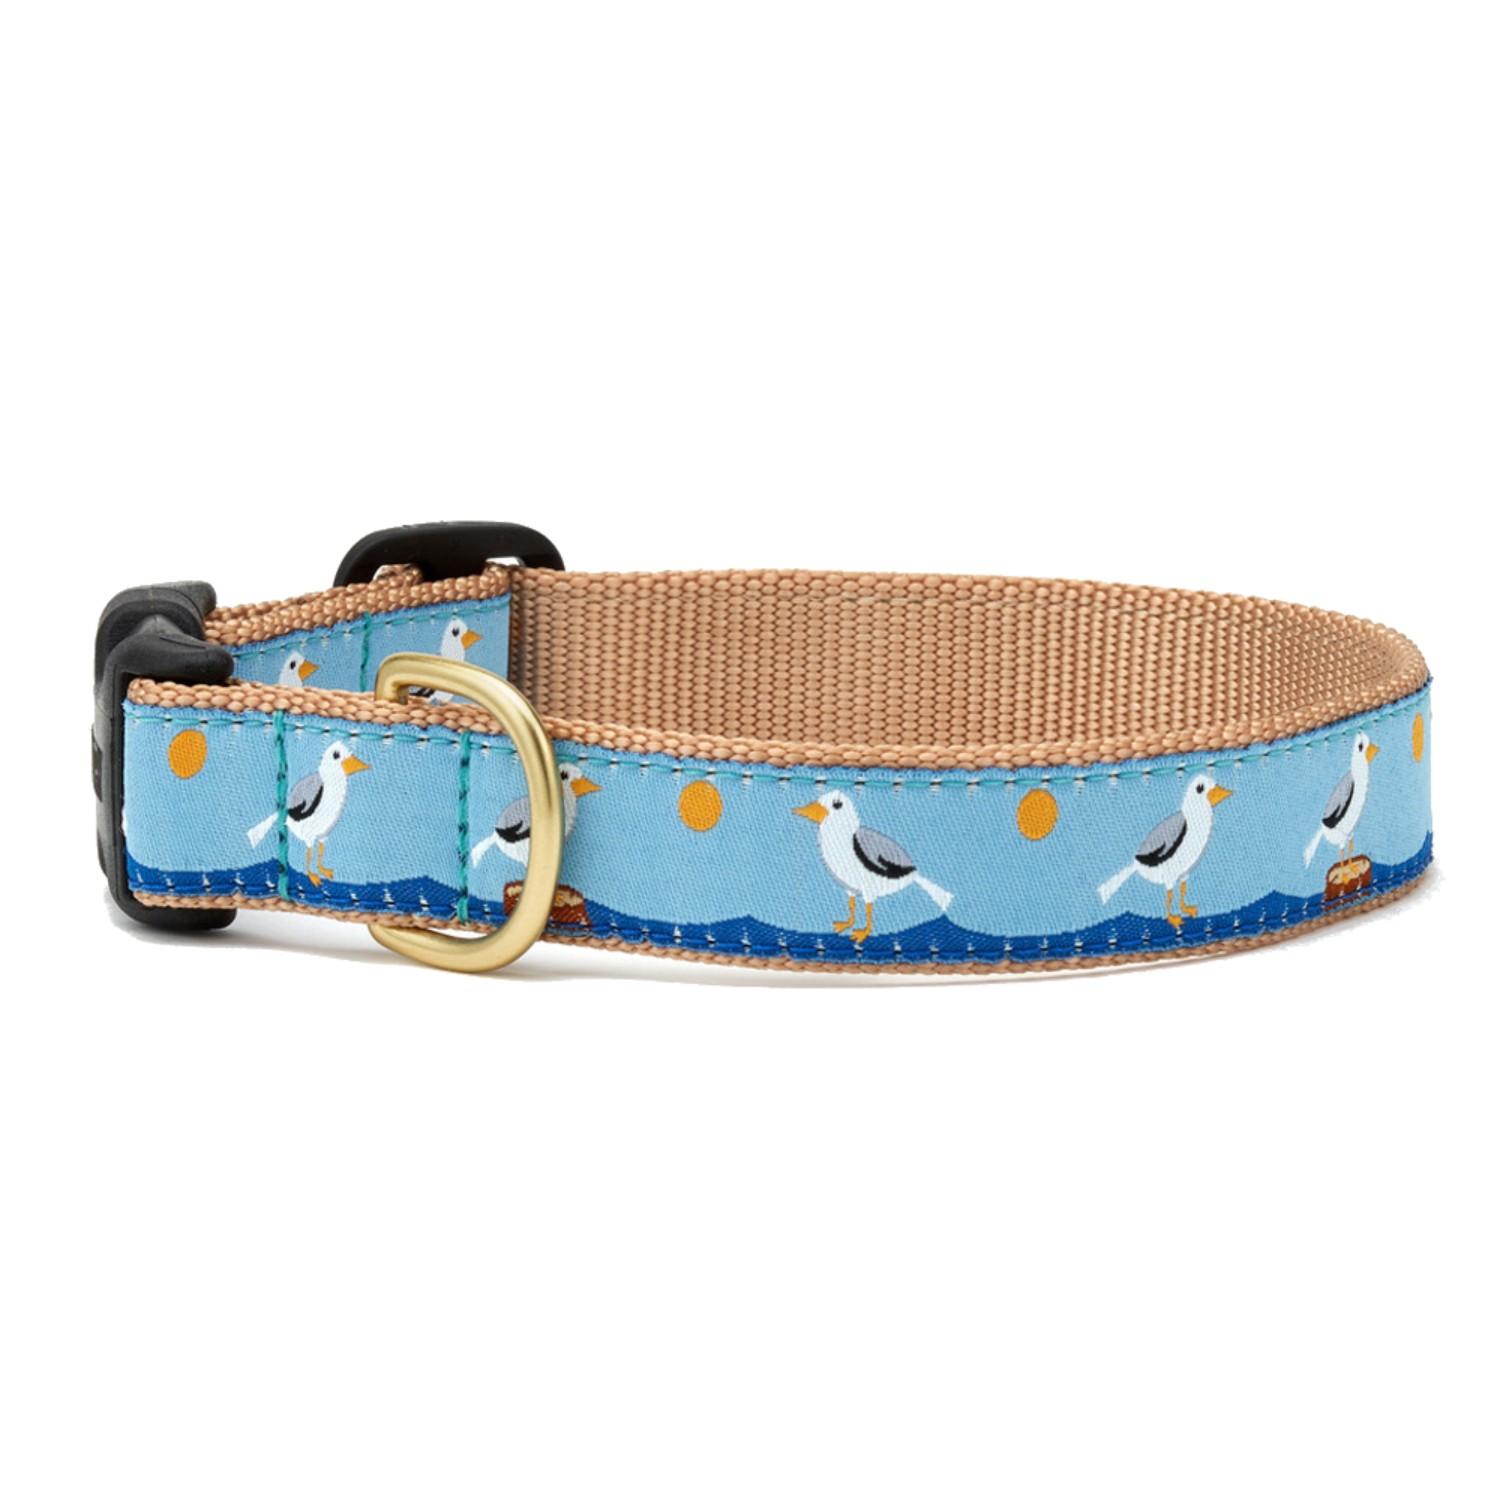 Gull Watch Dog Collar by Up Country